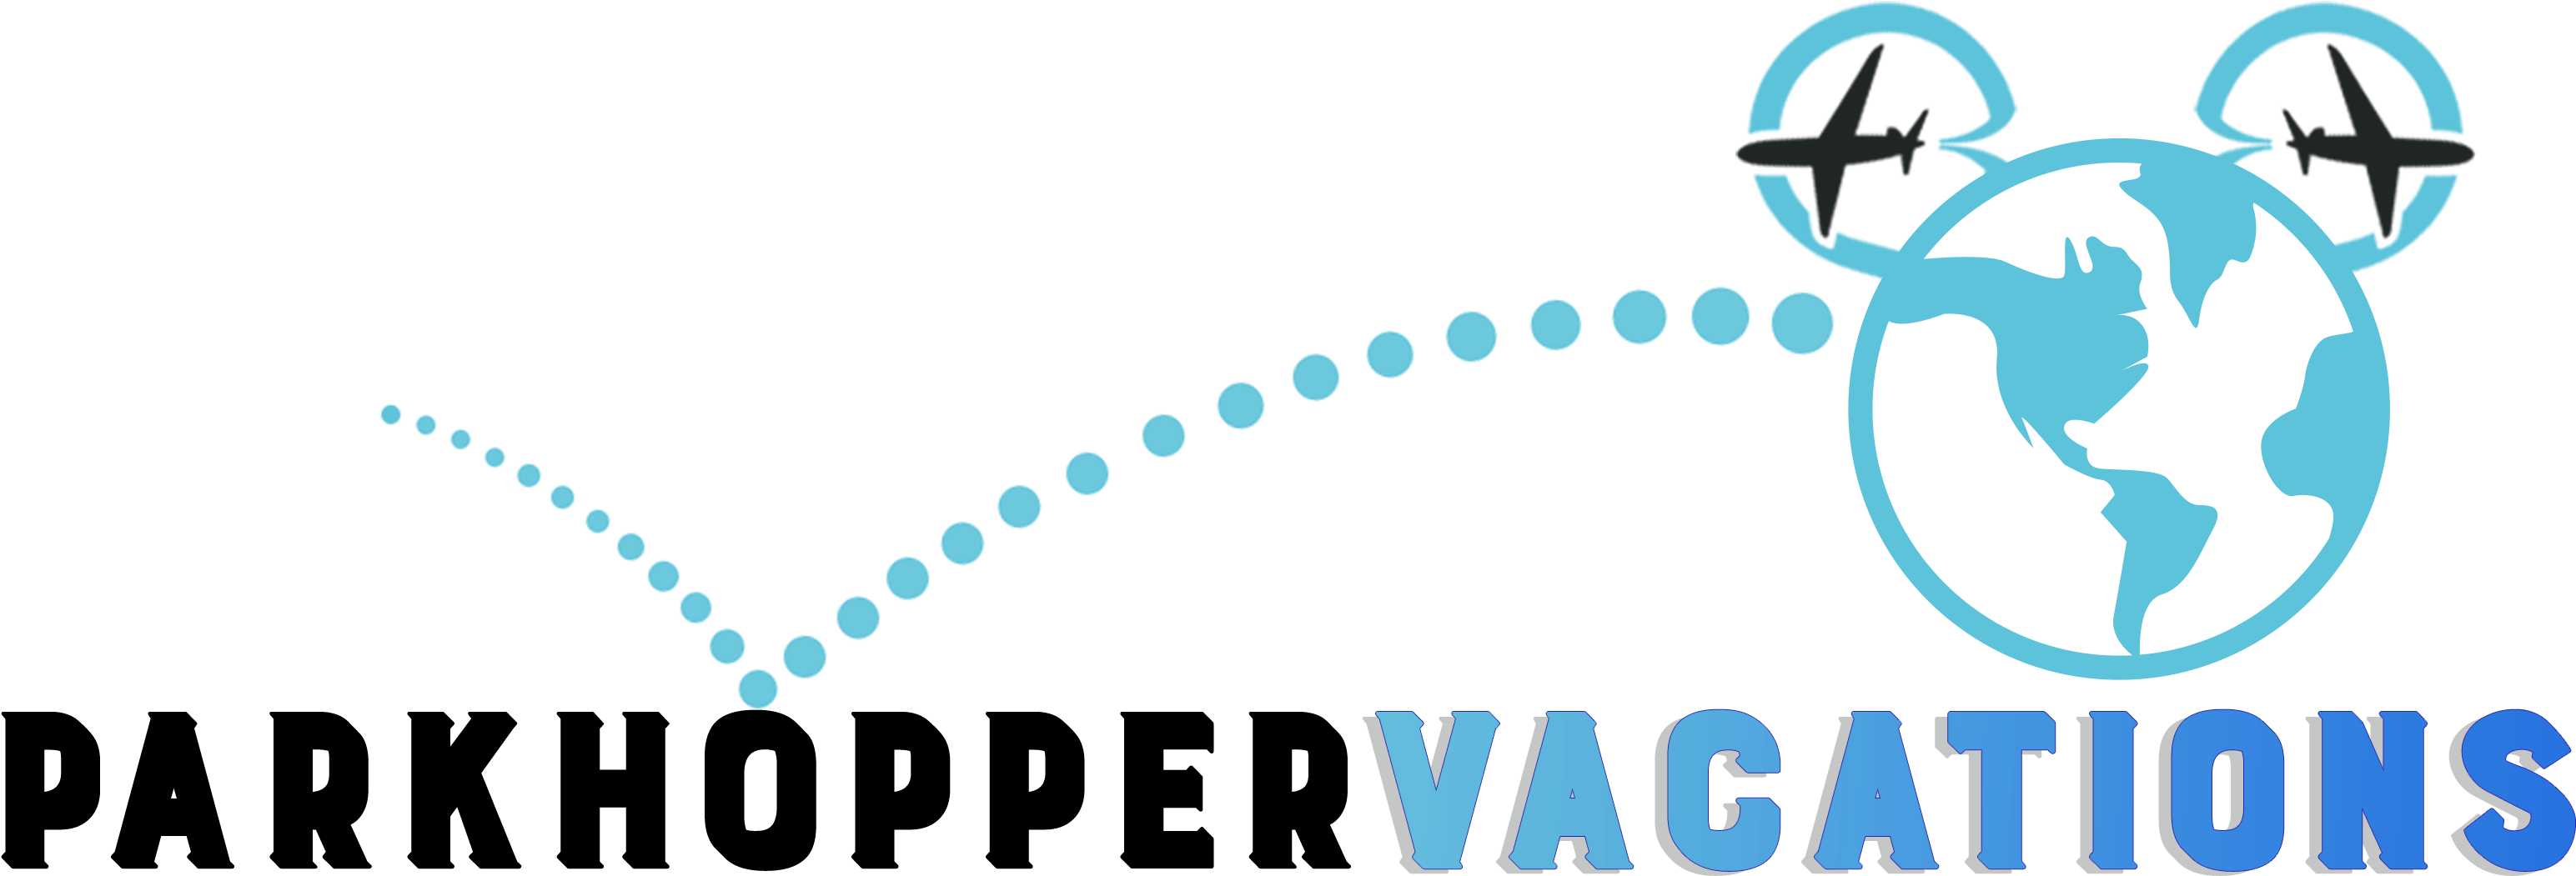 A Blue Dotted Line With Black Background